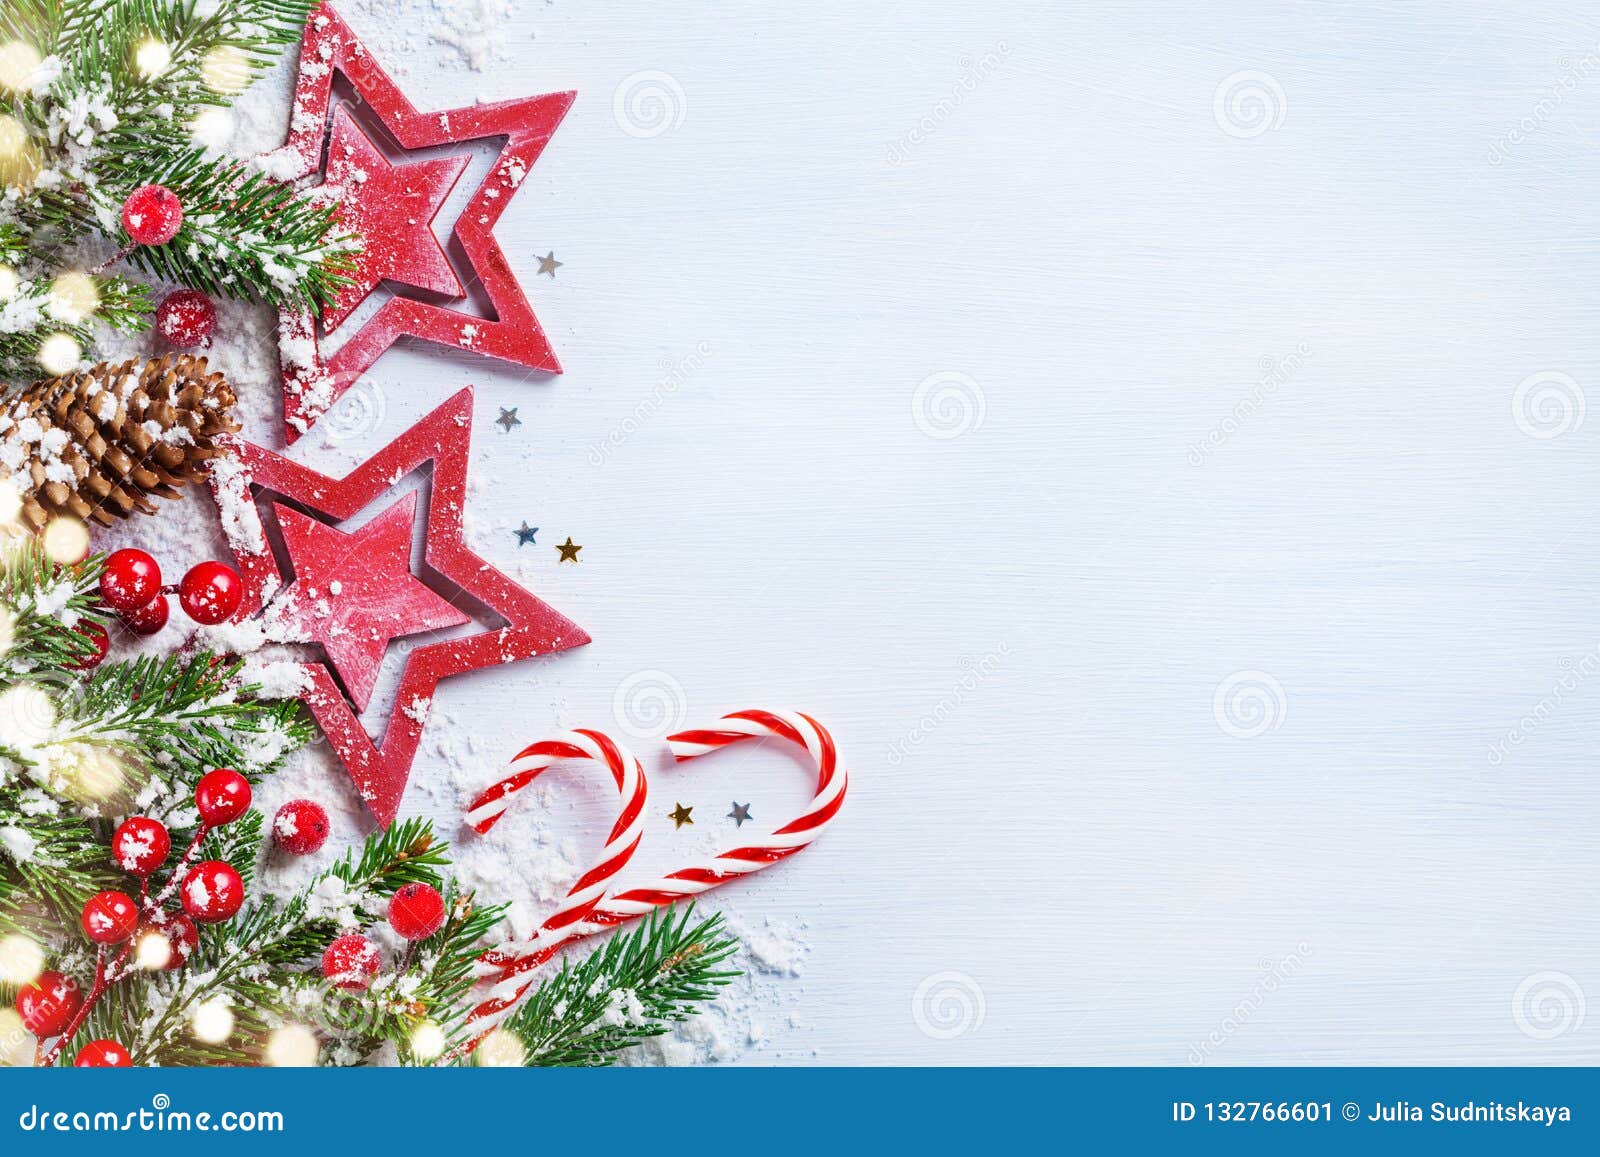 christmas background with stars, snowy fir branches, cones and bokeh lights. holiday banner or card